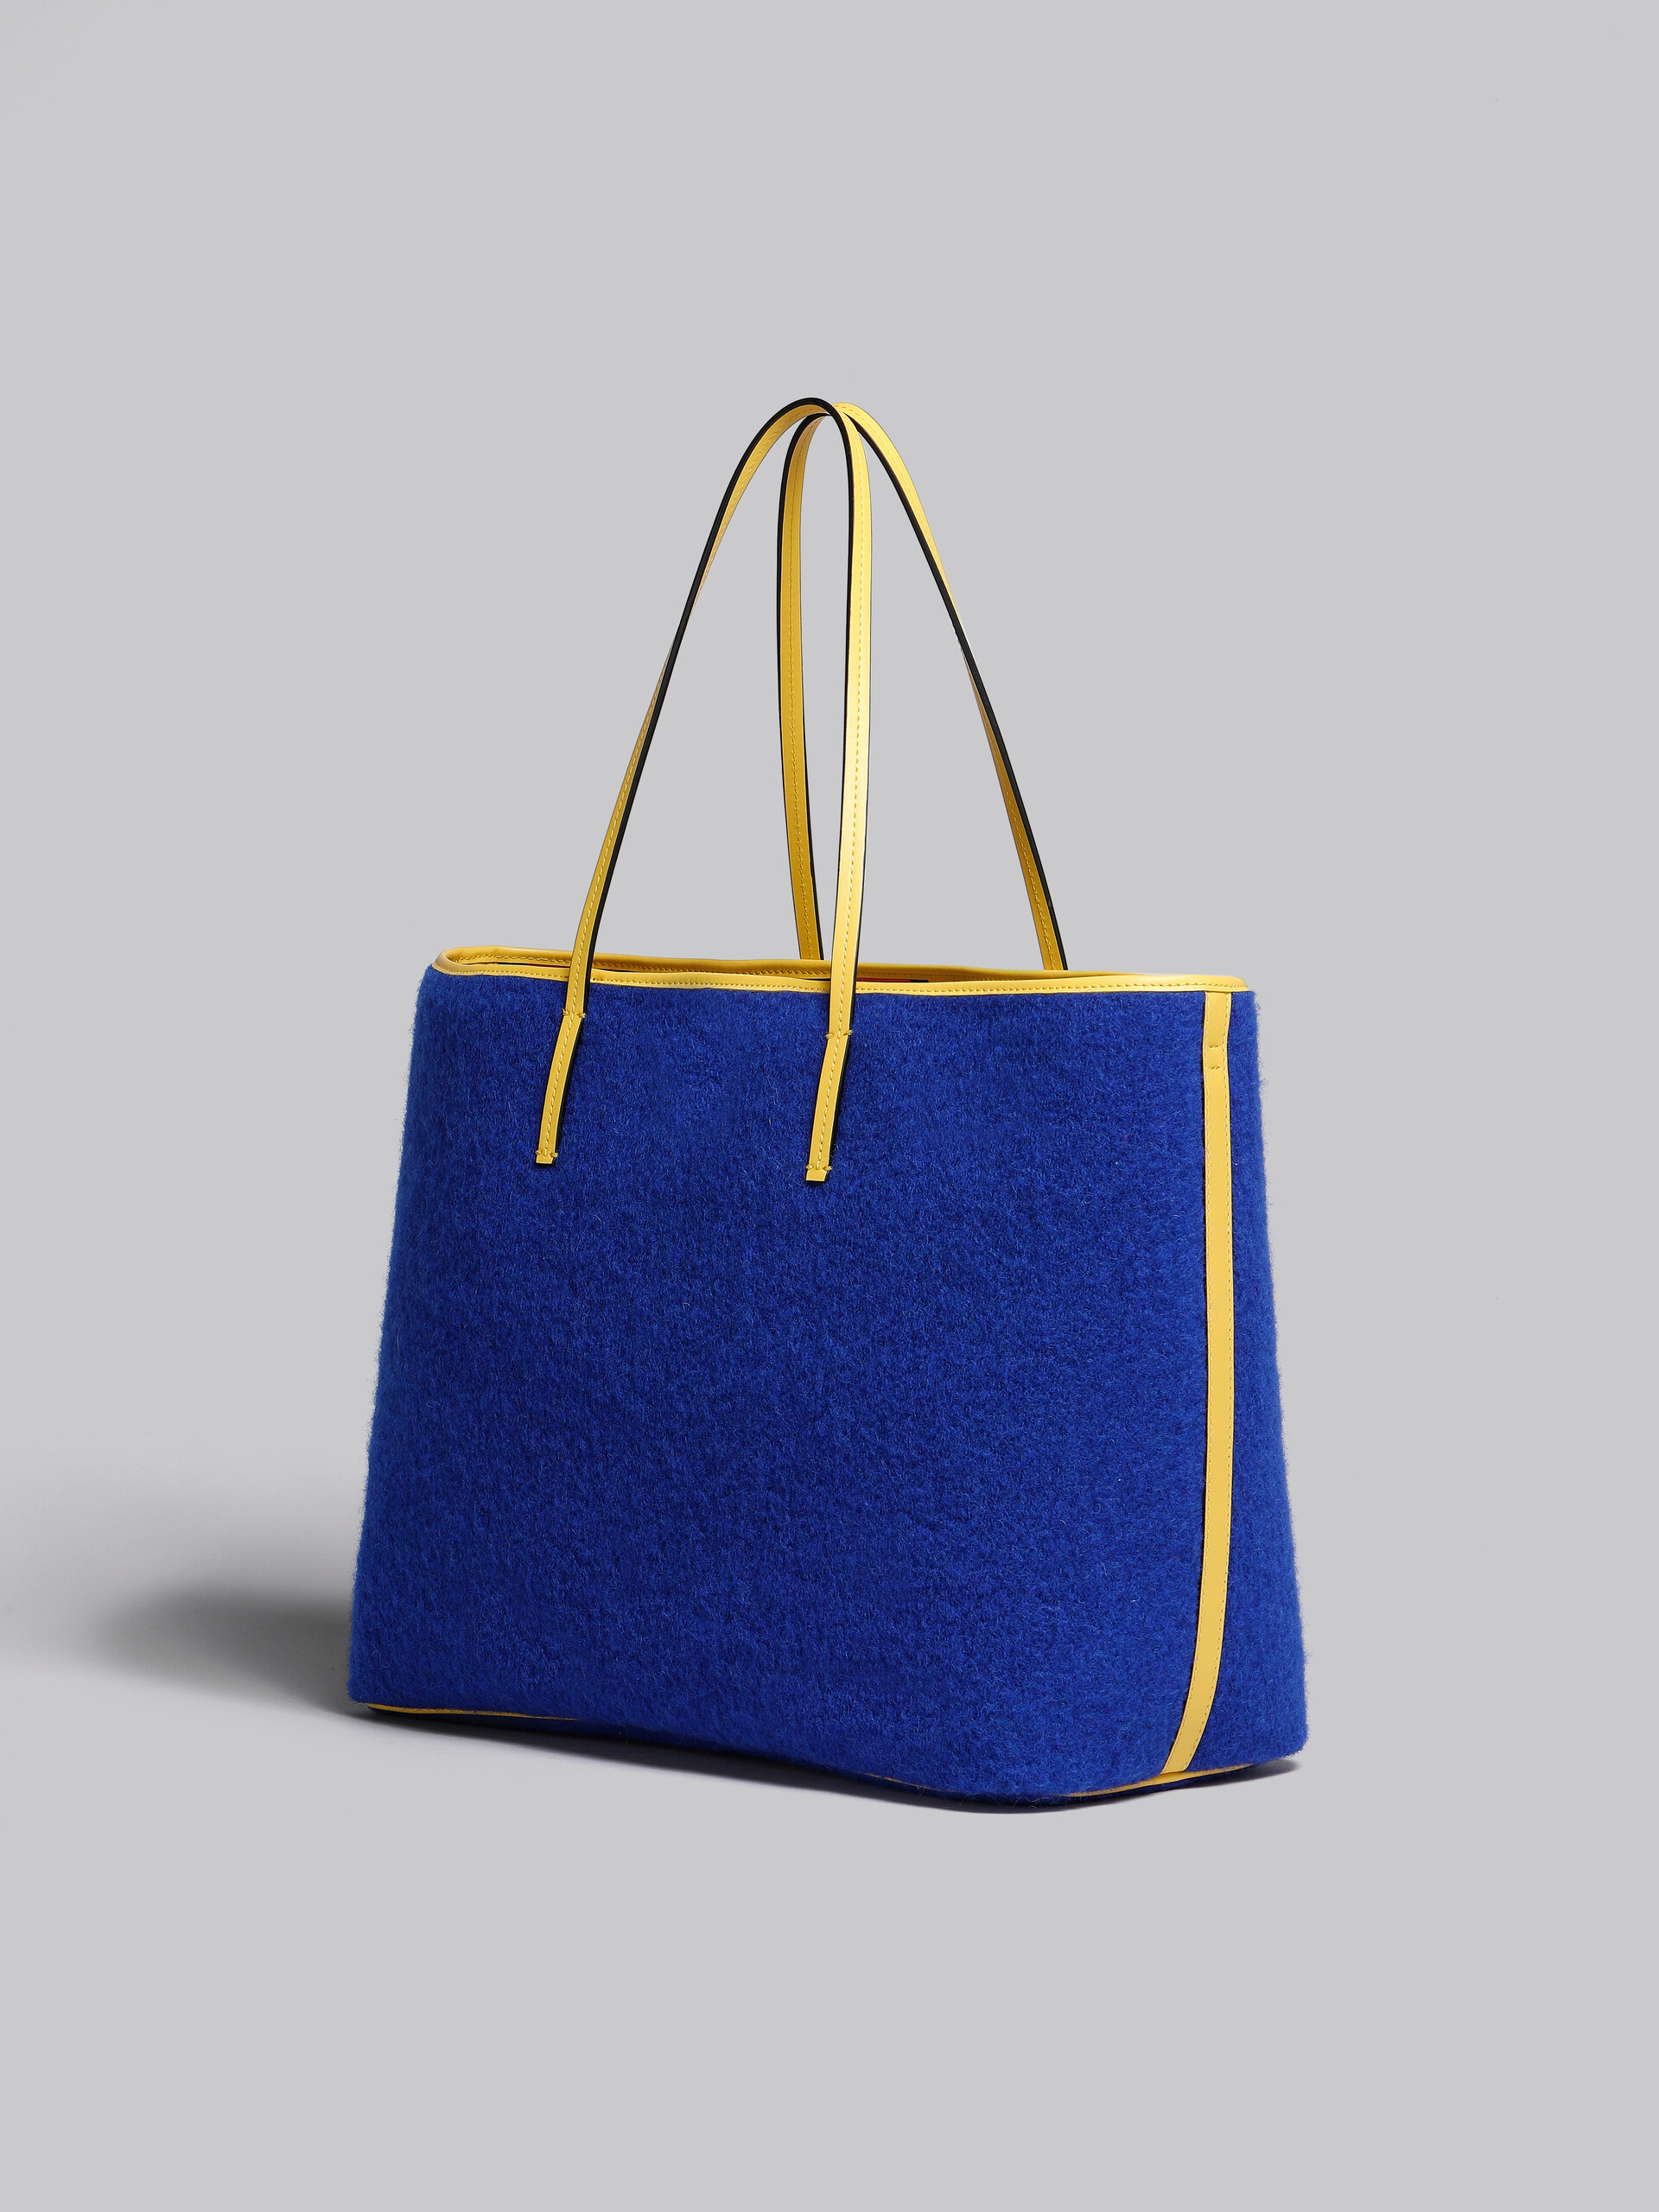 Blue reversible Shopping Bag in felt and cotton - Shopping Bags - Image 3